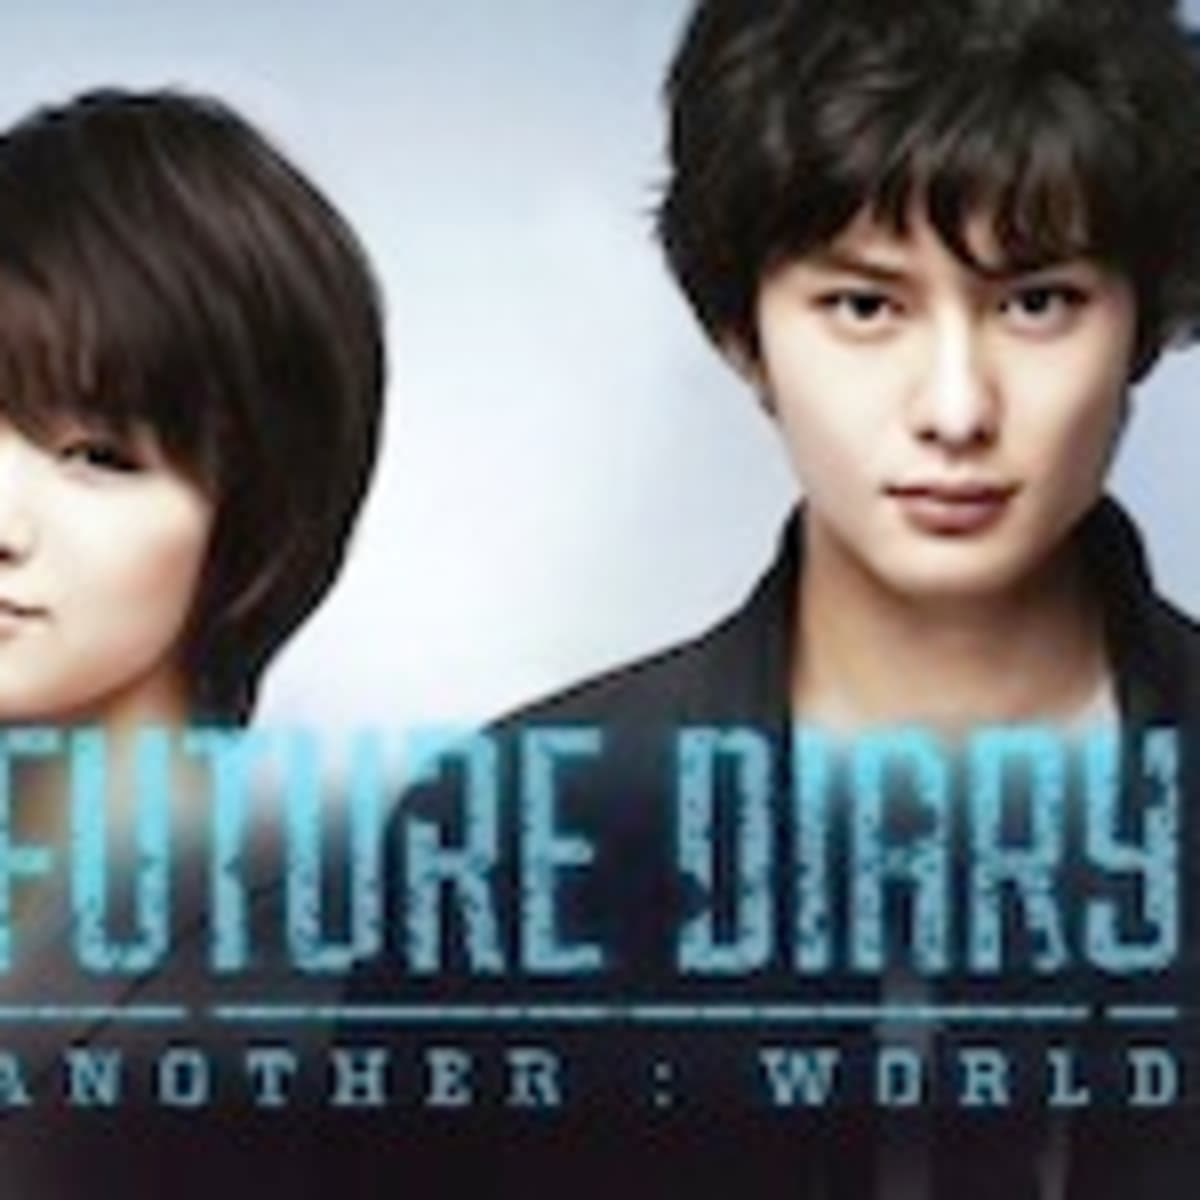 Review of Japanese Drama Series 'Future Diary - Another World